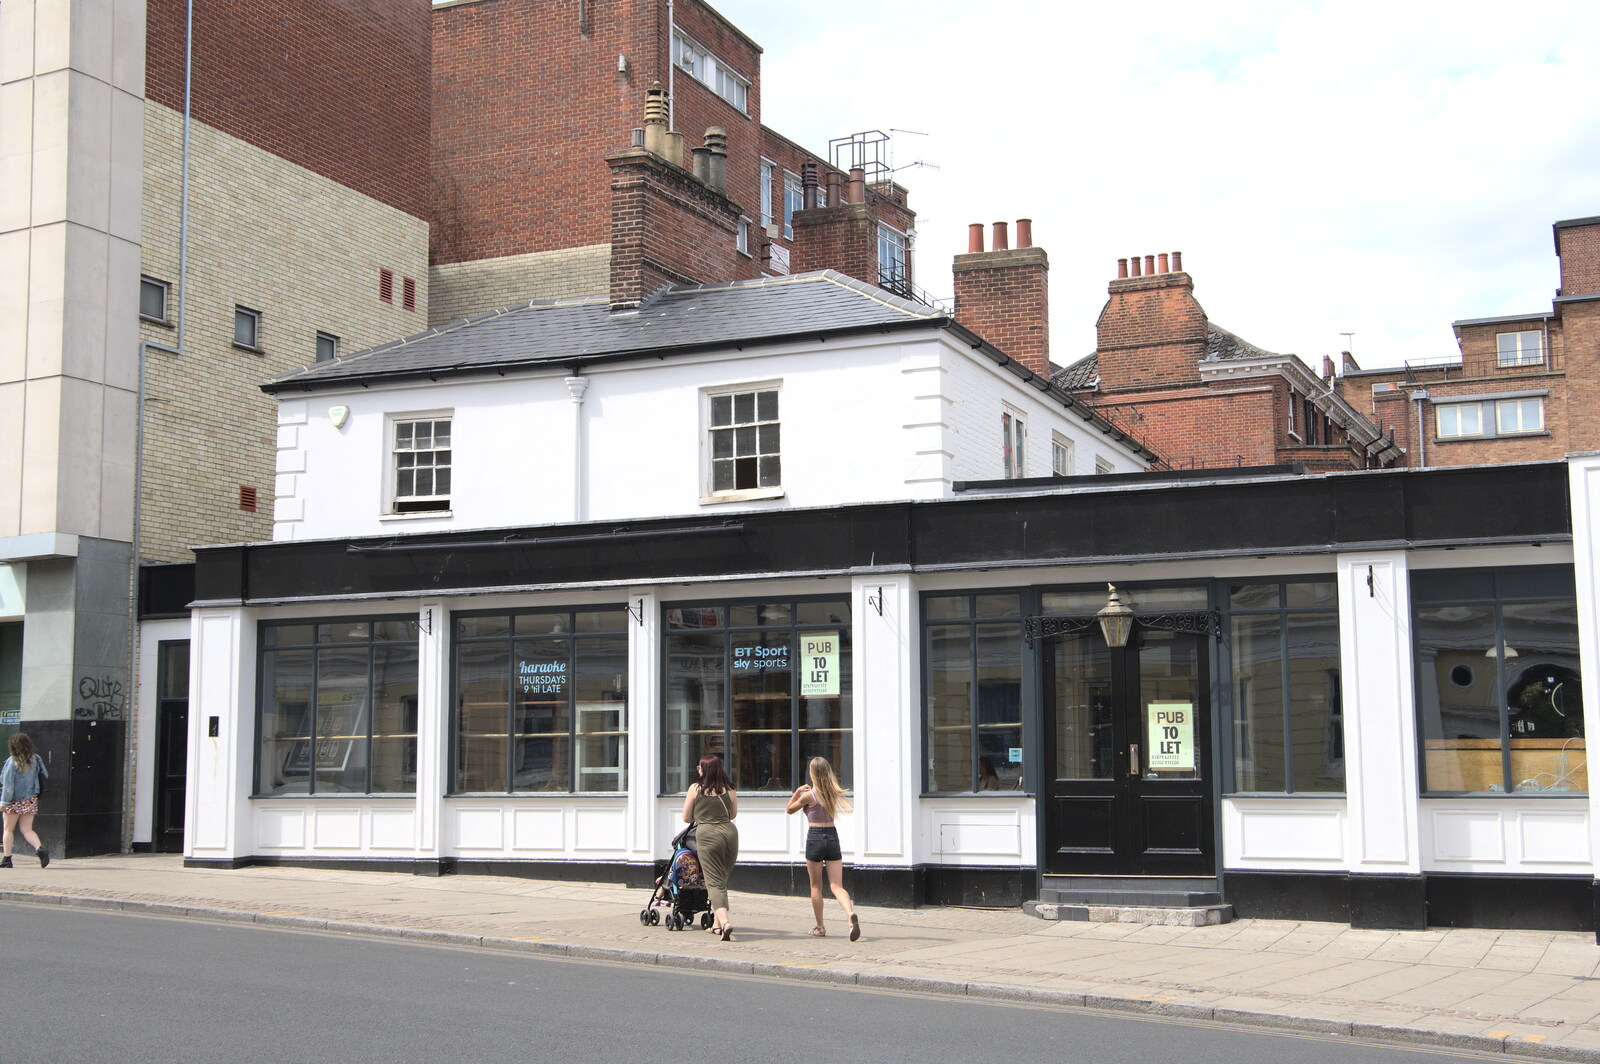 A July Miscellany, Diss, Eye and Norwich - 23rd July 2022: The recently-reopened Prince of Wales is vacant